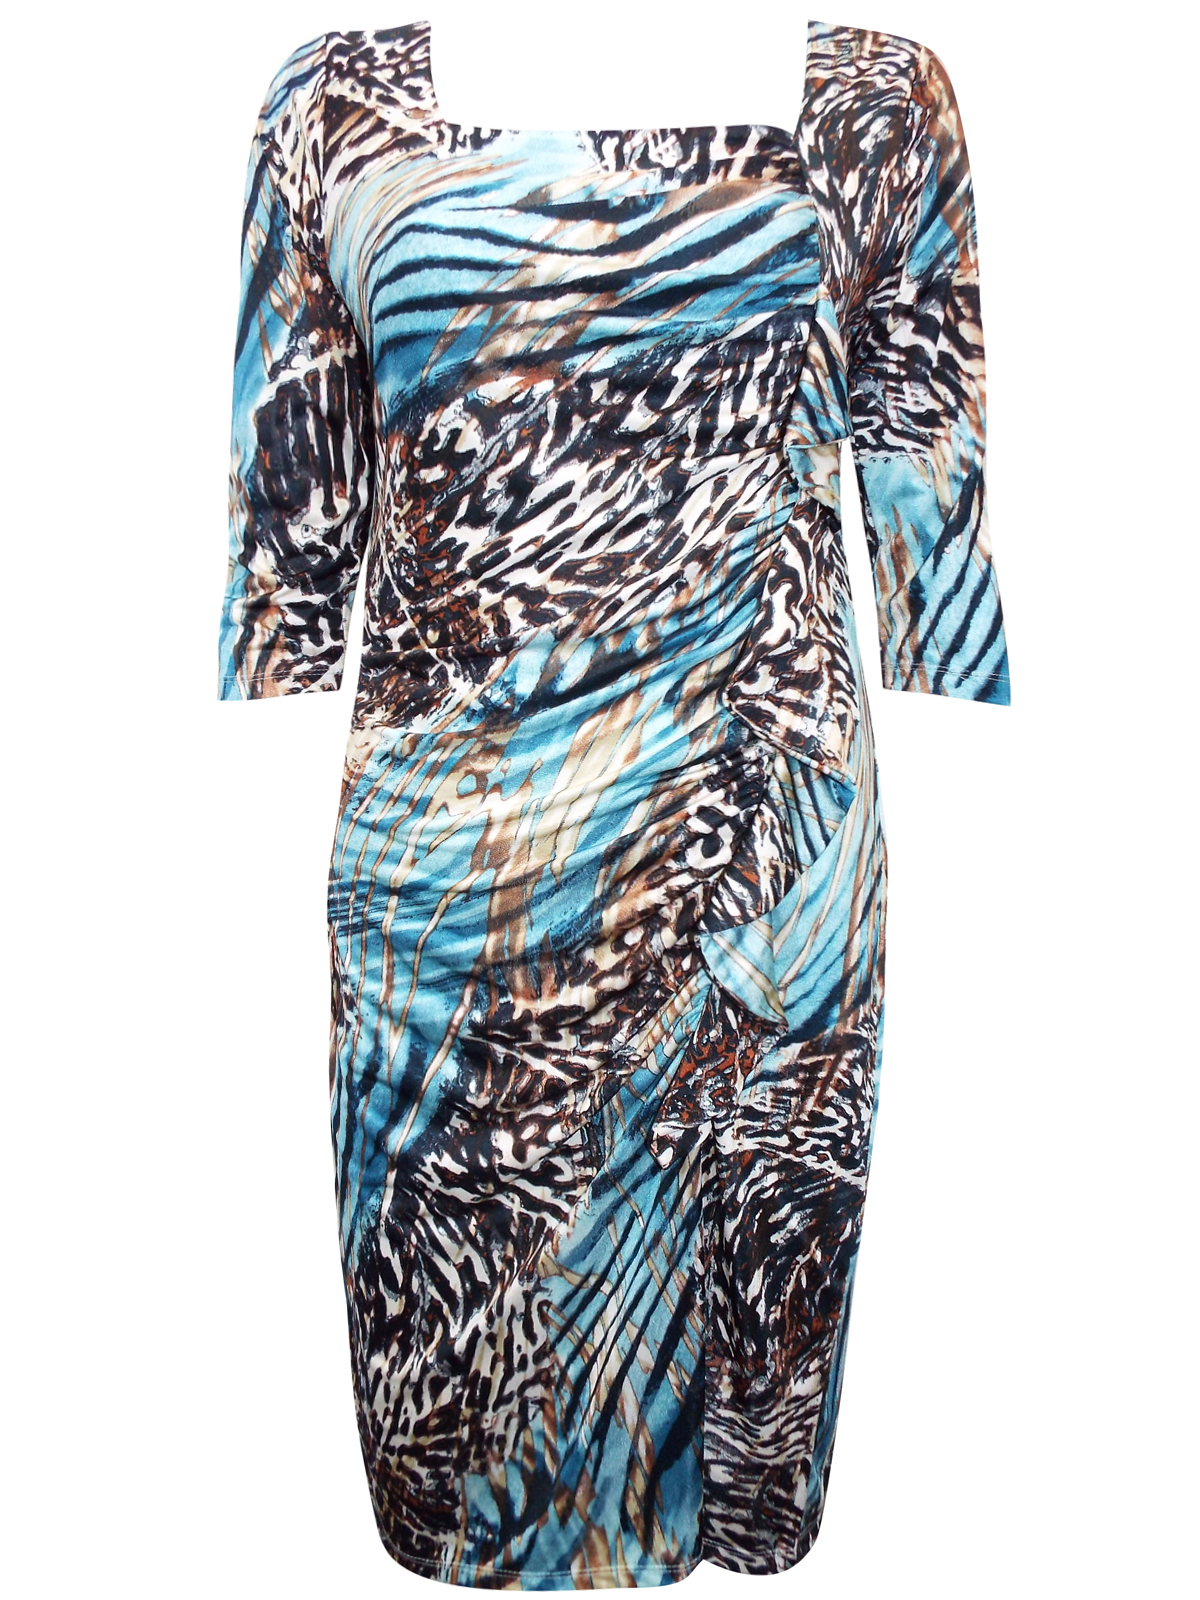 ASSORTED Printed Dresses - Size 10 to 18